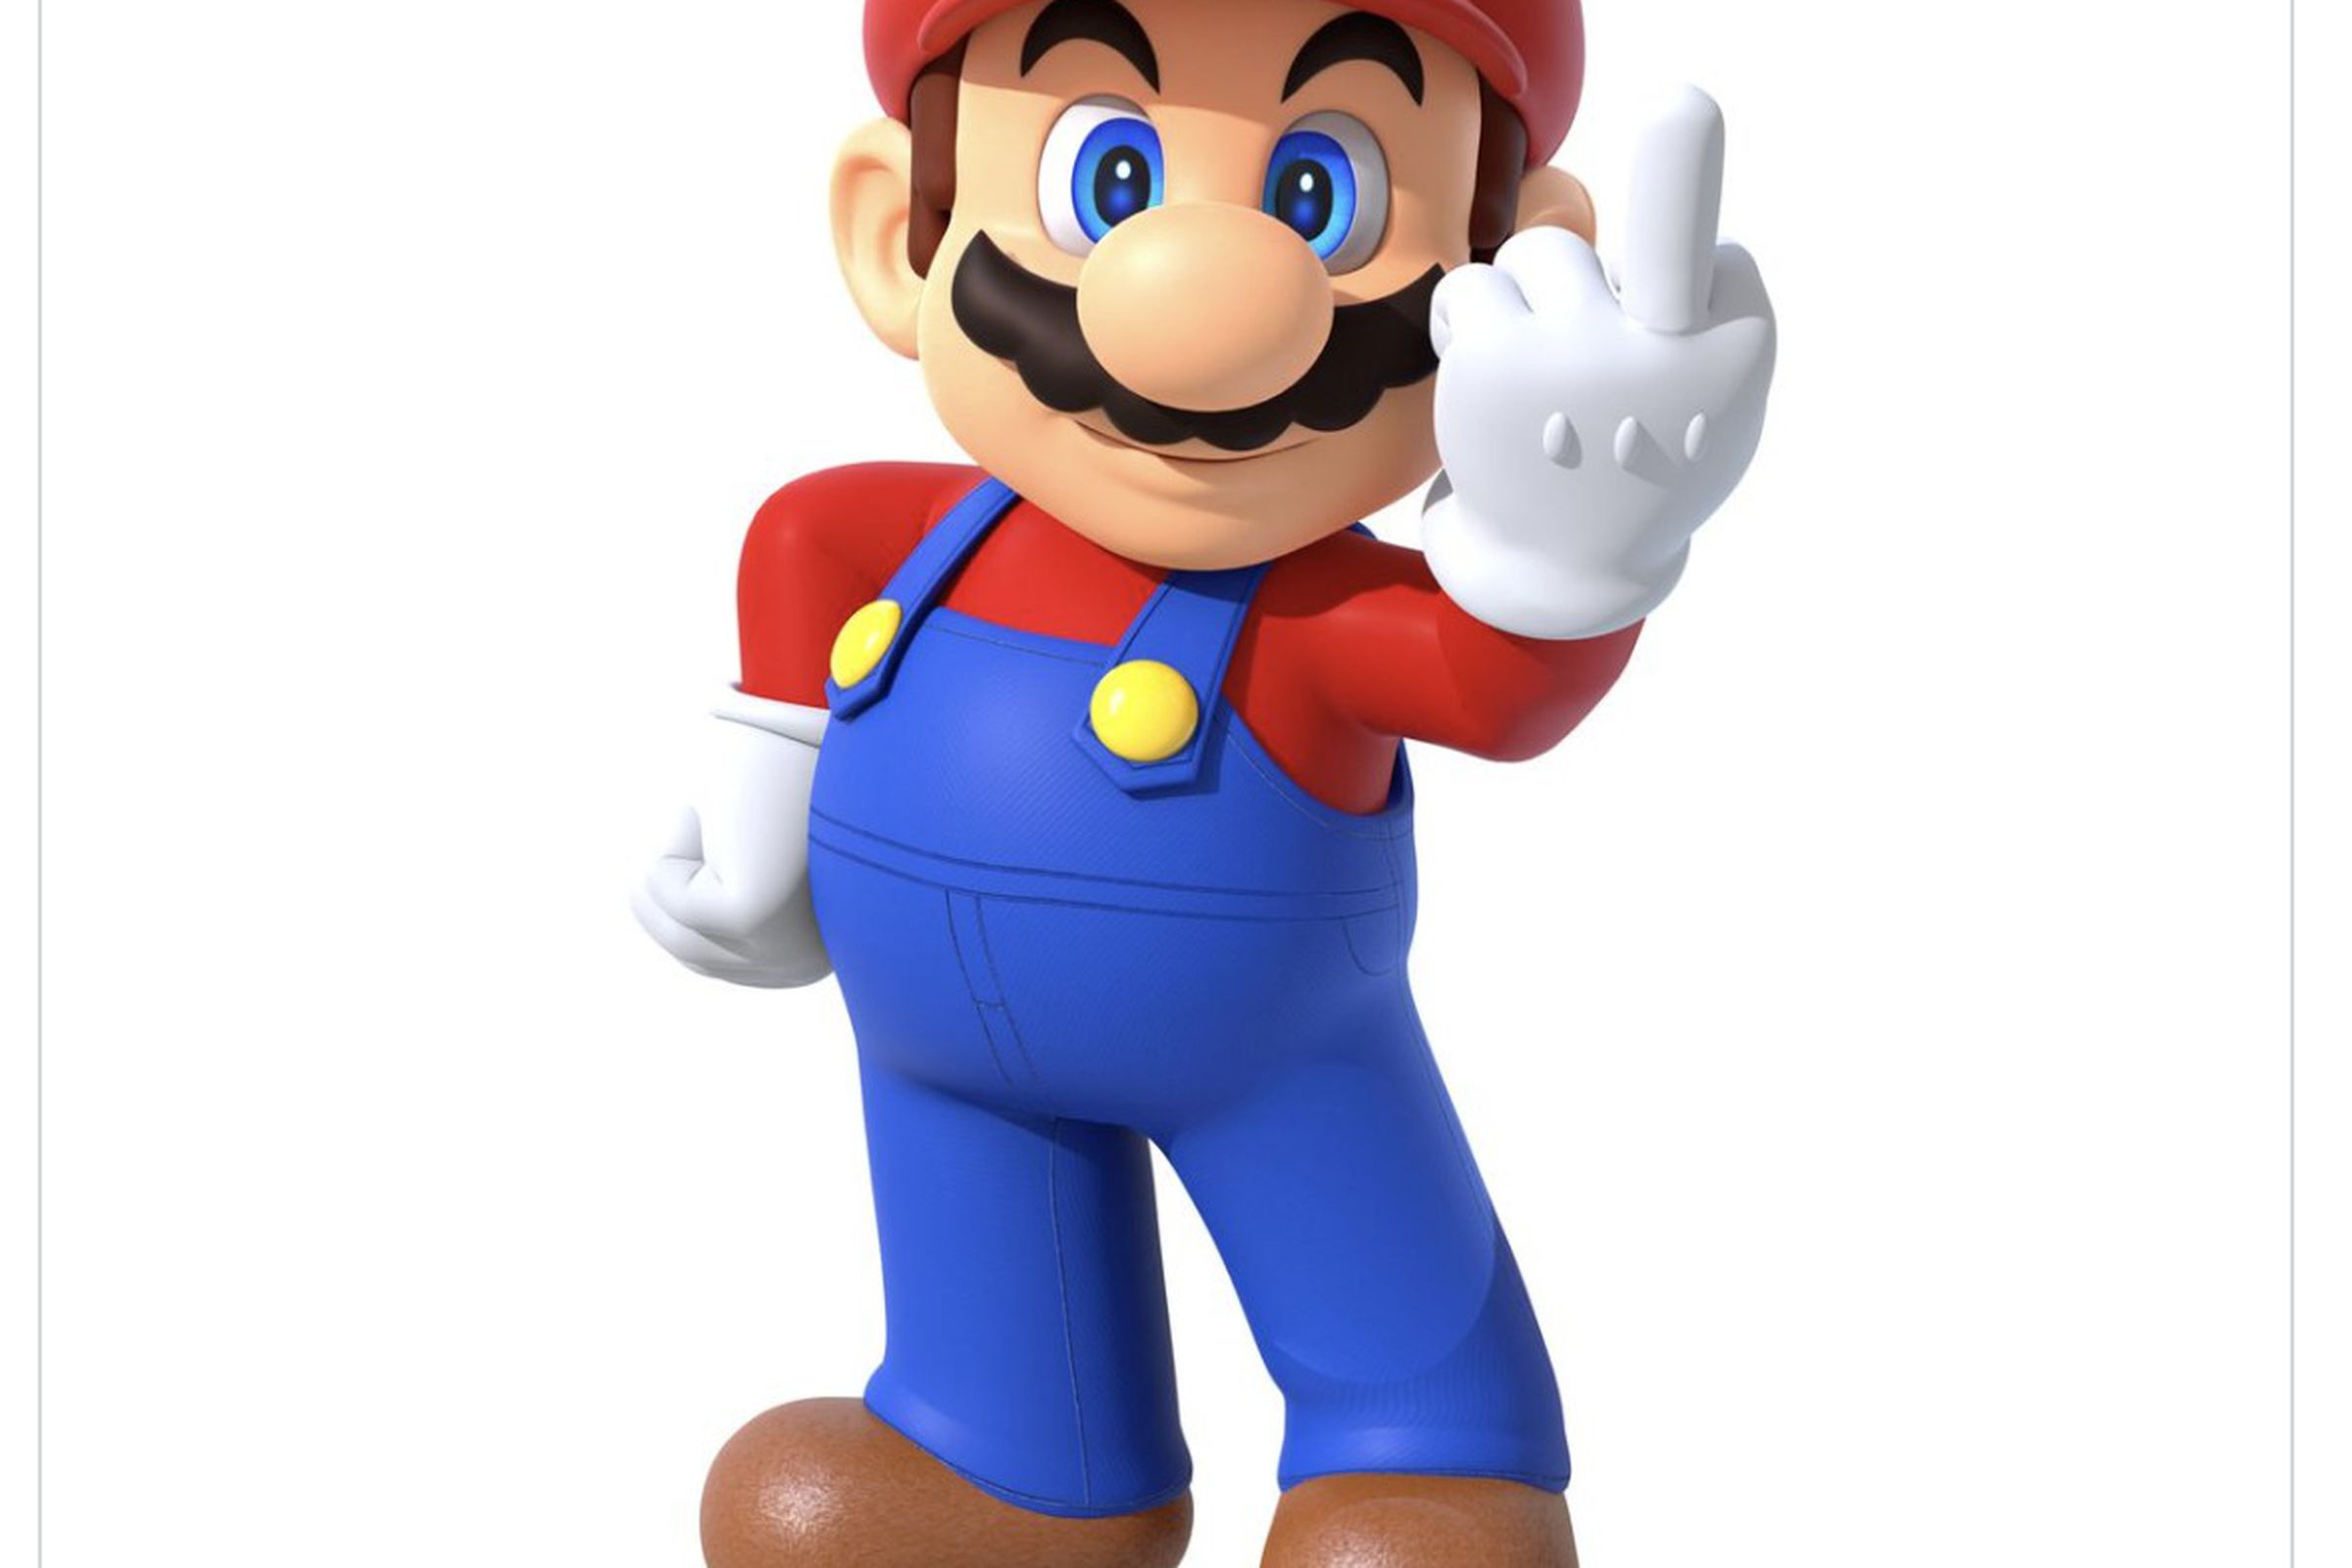 A picture of Nintendo character Mario holding up his middle finger